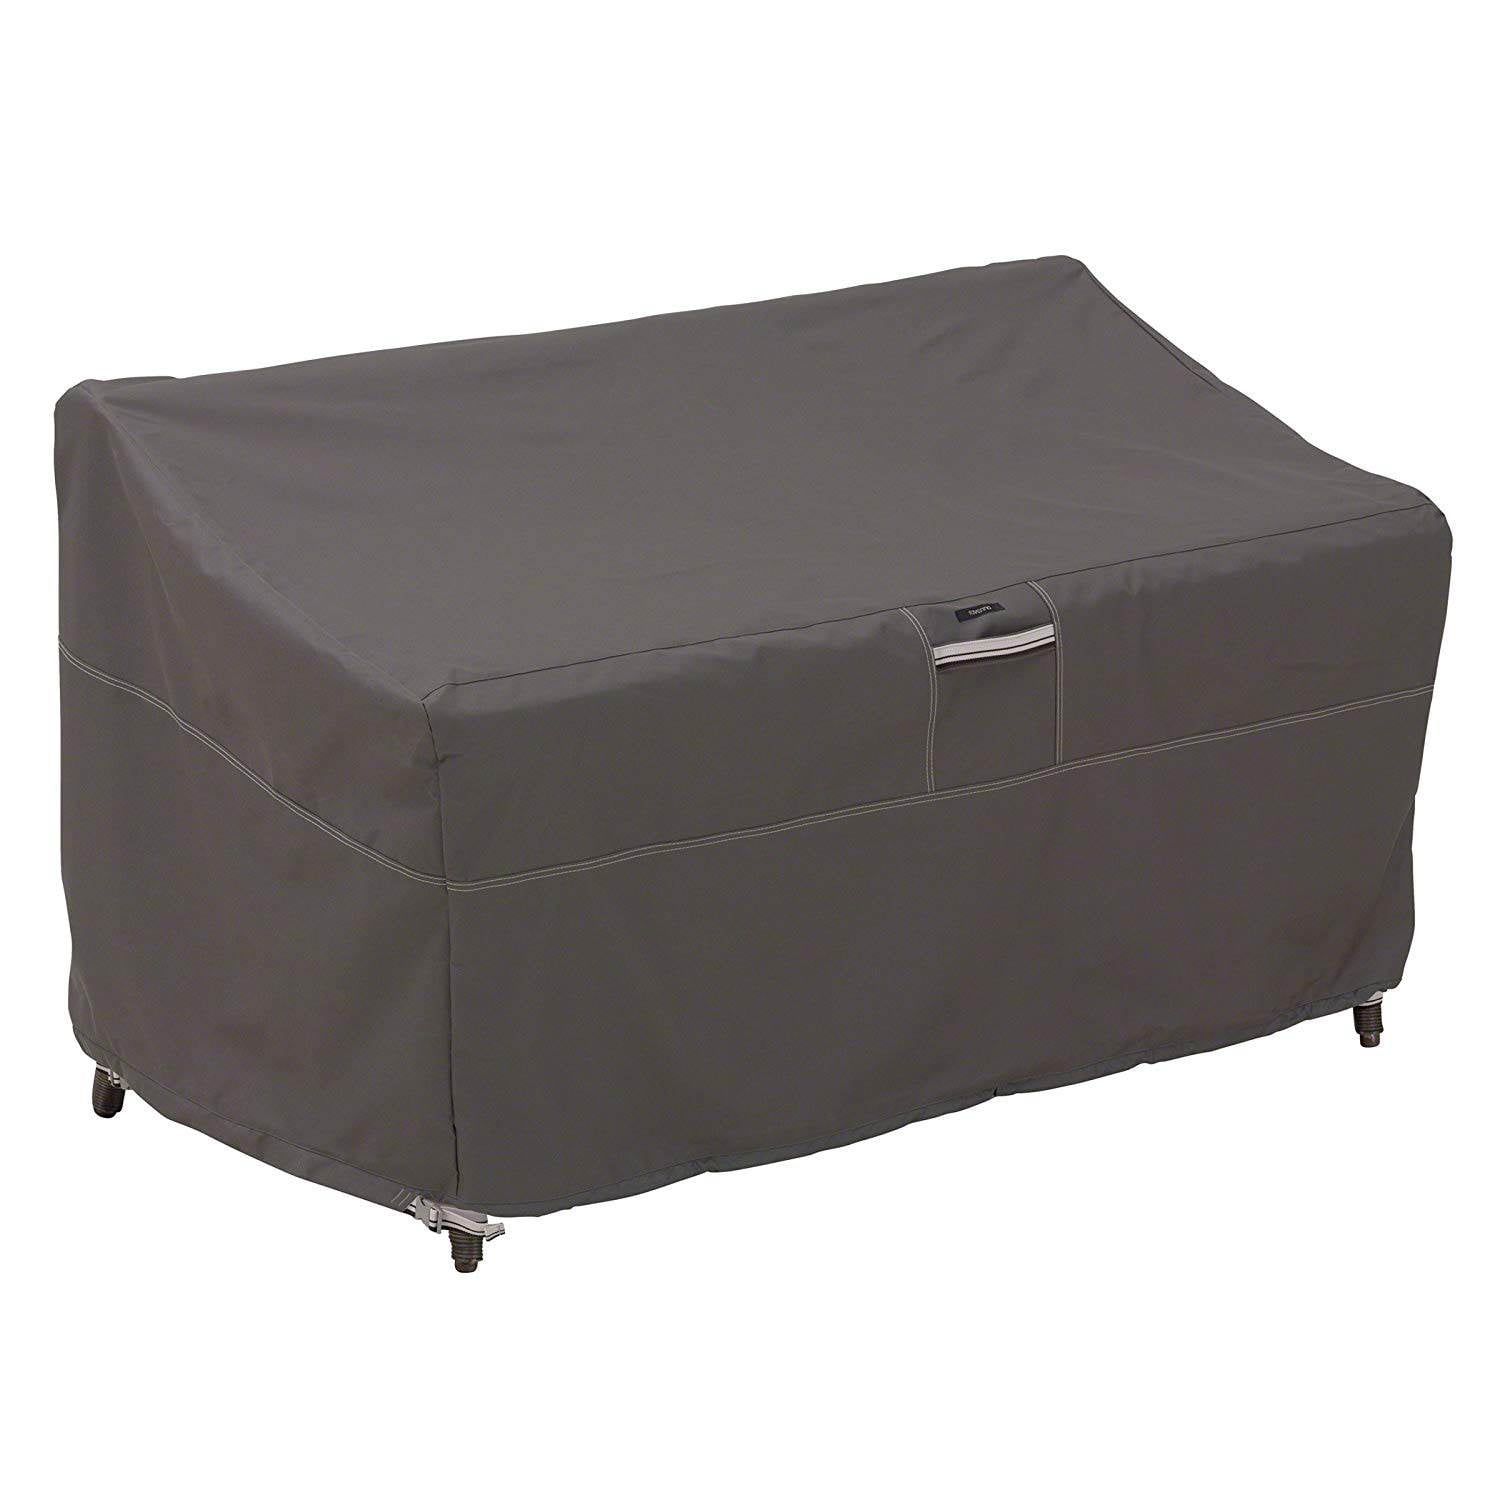 Ravenna Built-In BBQ Cover Small Grey 